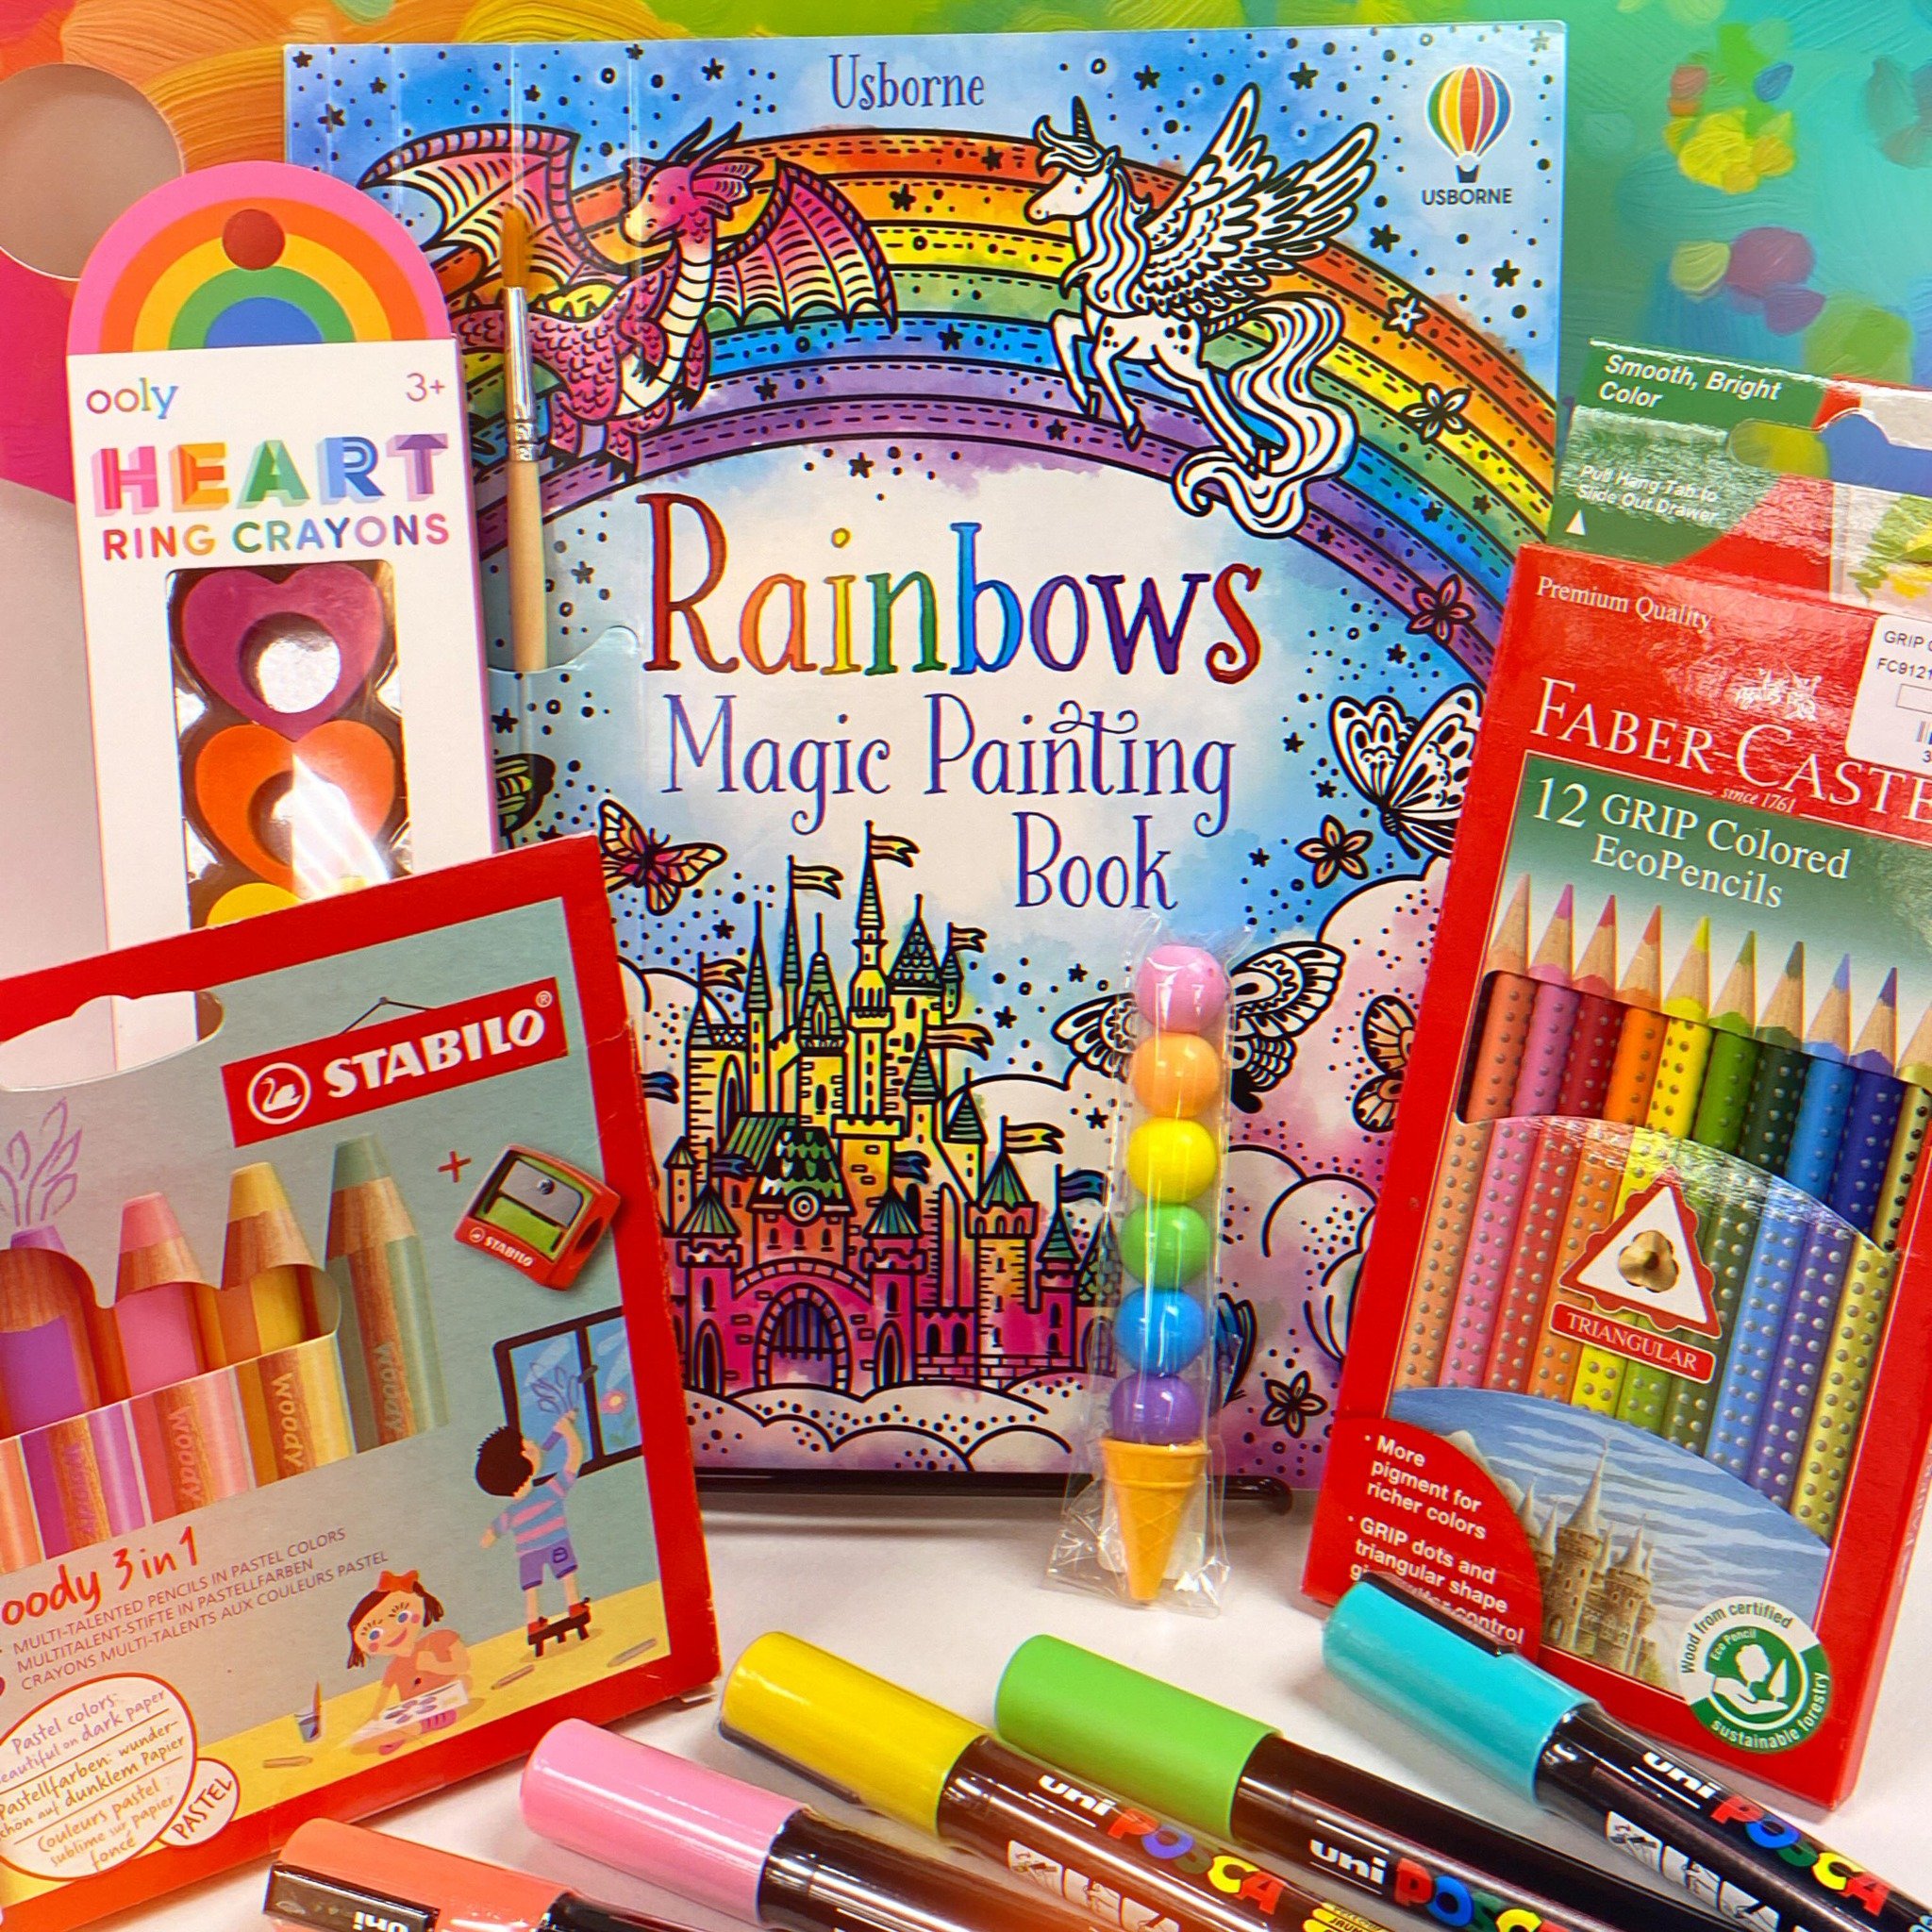 Just in! New 🌈 Rainbows Magic Painting Books 🌈 just add water for a no-mess way to spark creativity with your kids! Comes with a brush. 
So many colorful art supplies to make your own rainbow! Have fun with @usborne_books @weareooly, @stabilo, @pos